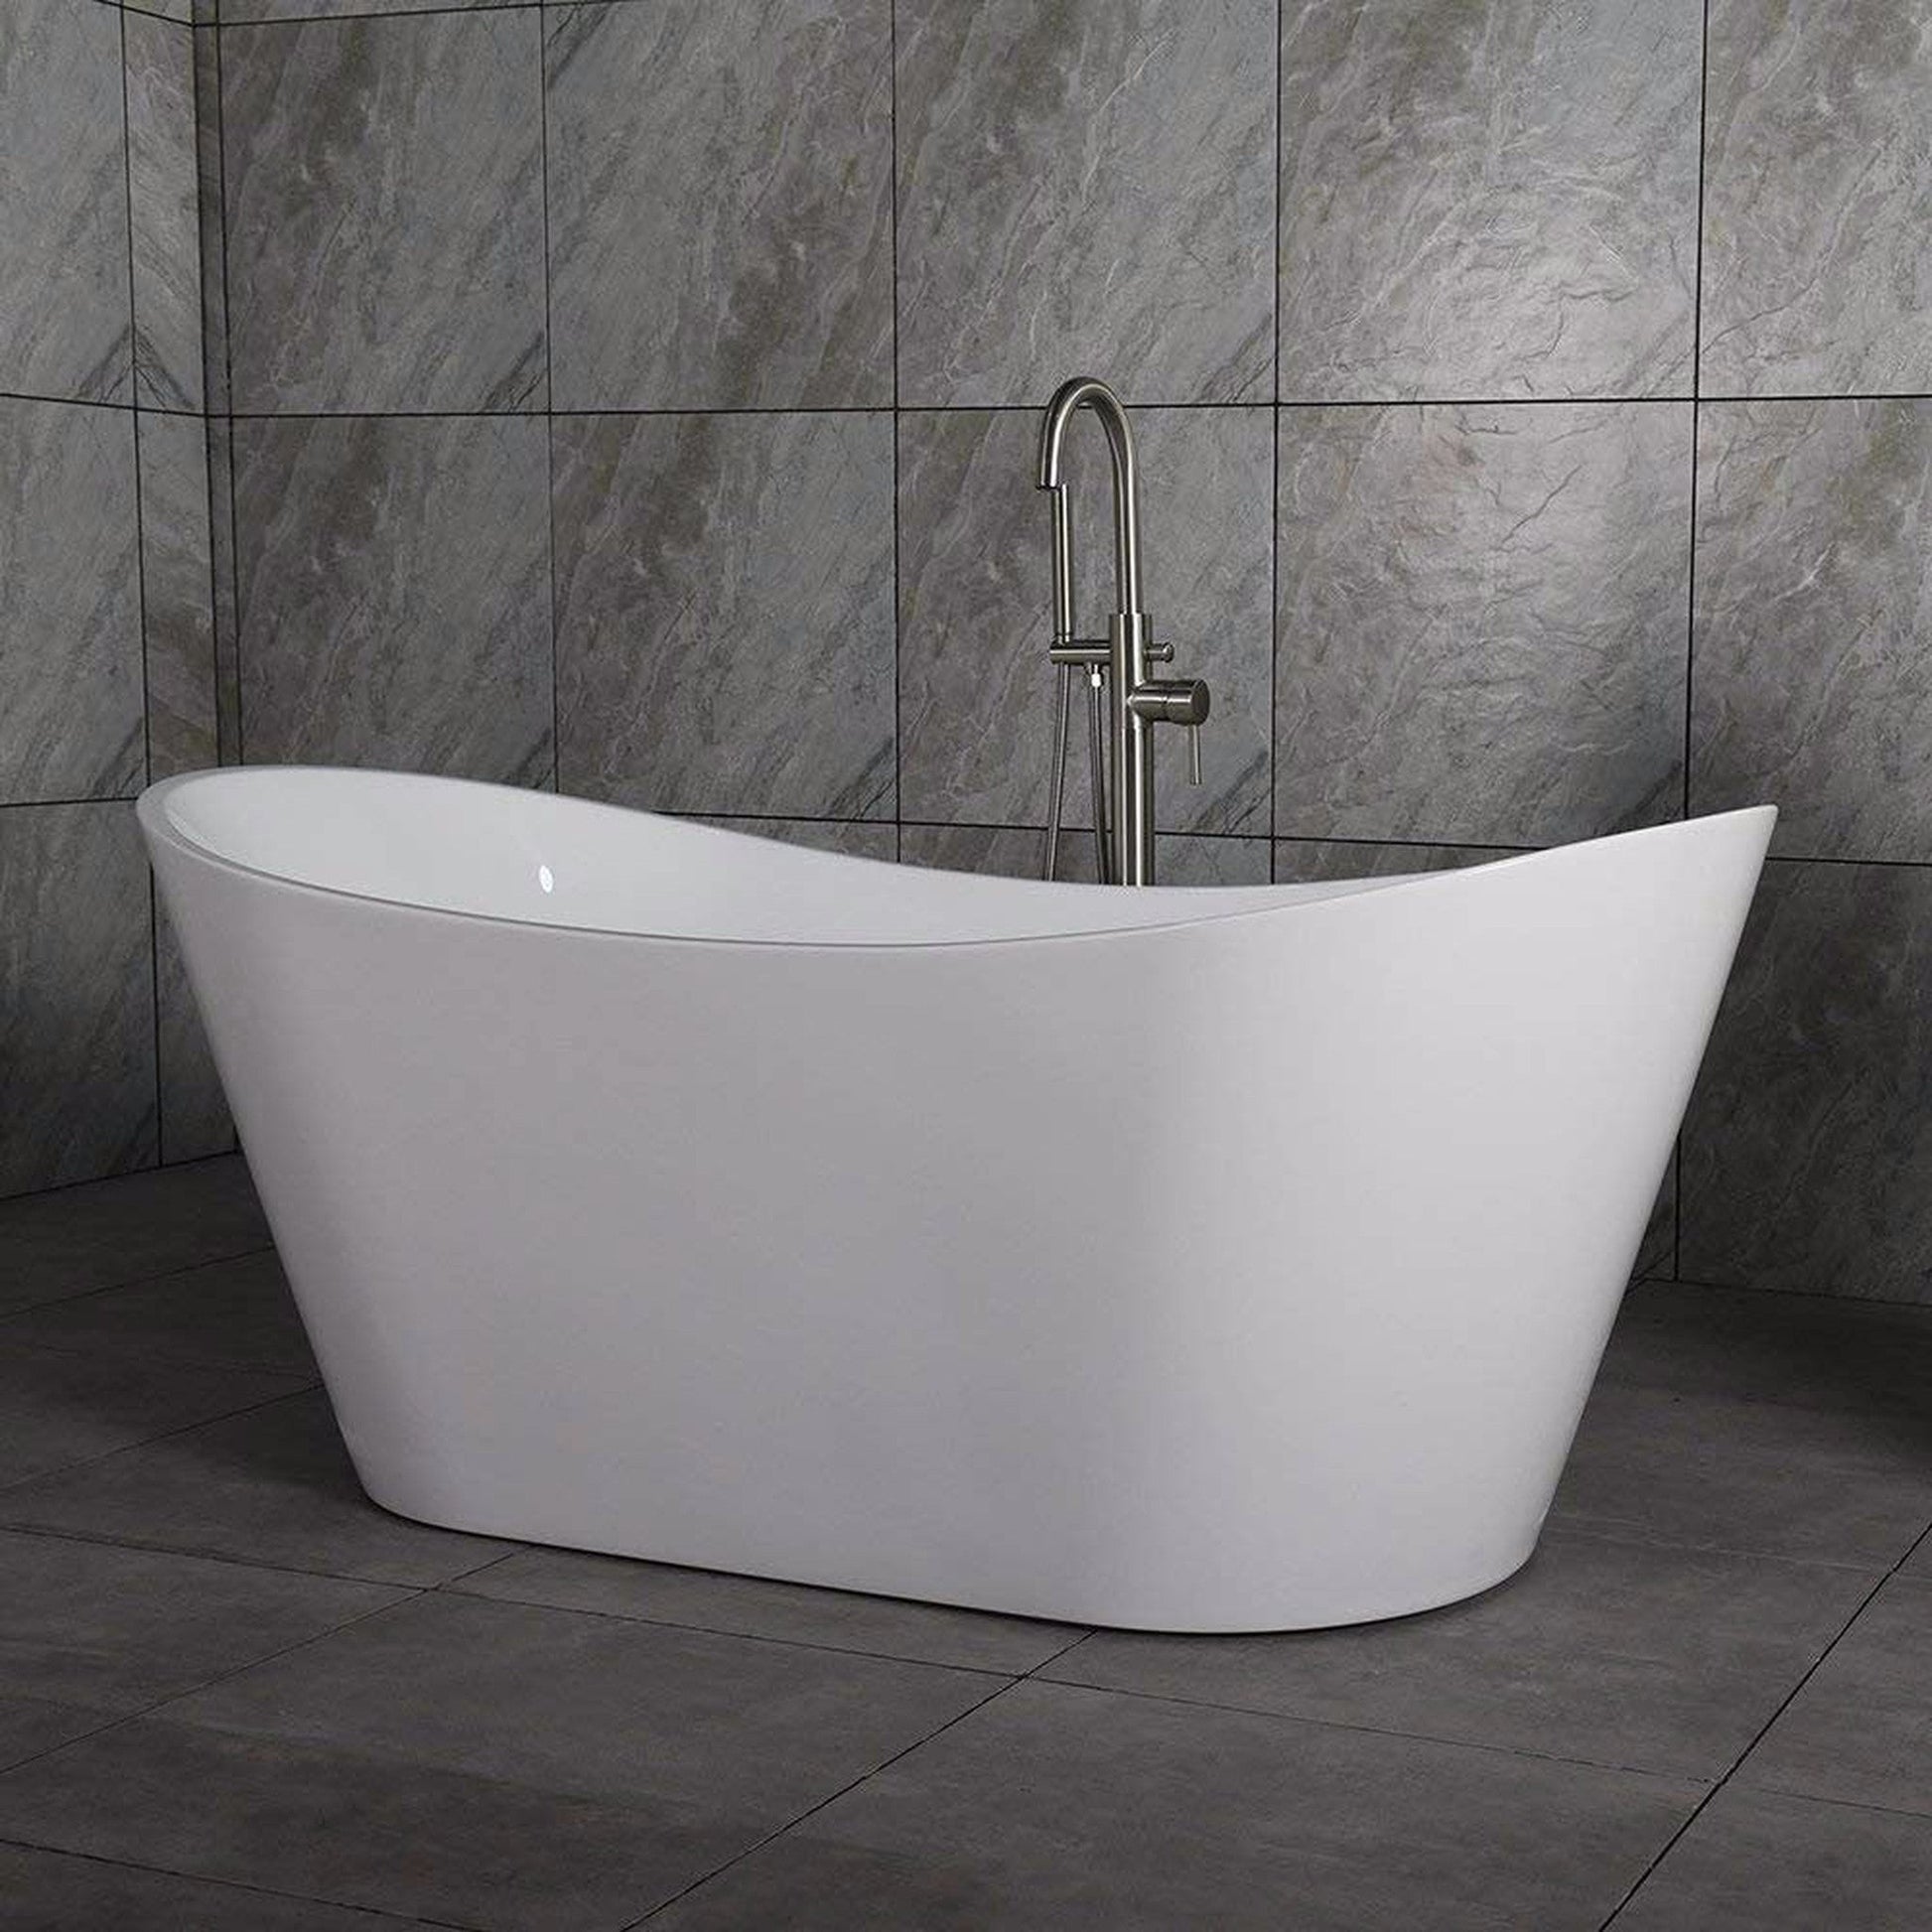 WoodBridge B0010 67" White Acrylic Freestanding Contemporary Soaking Bathtub With Brushed Nickel Drain, Overflow, F0070BNRD Tub Filler and Caddy Tray